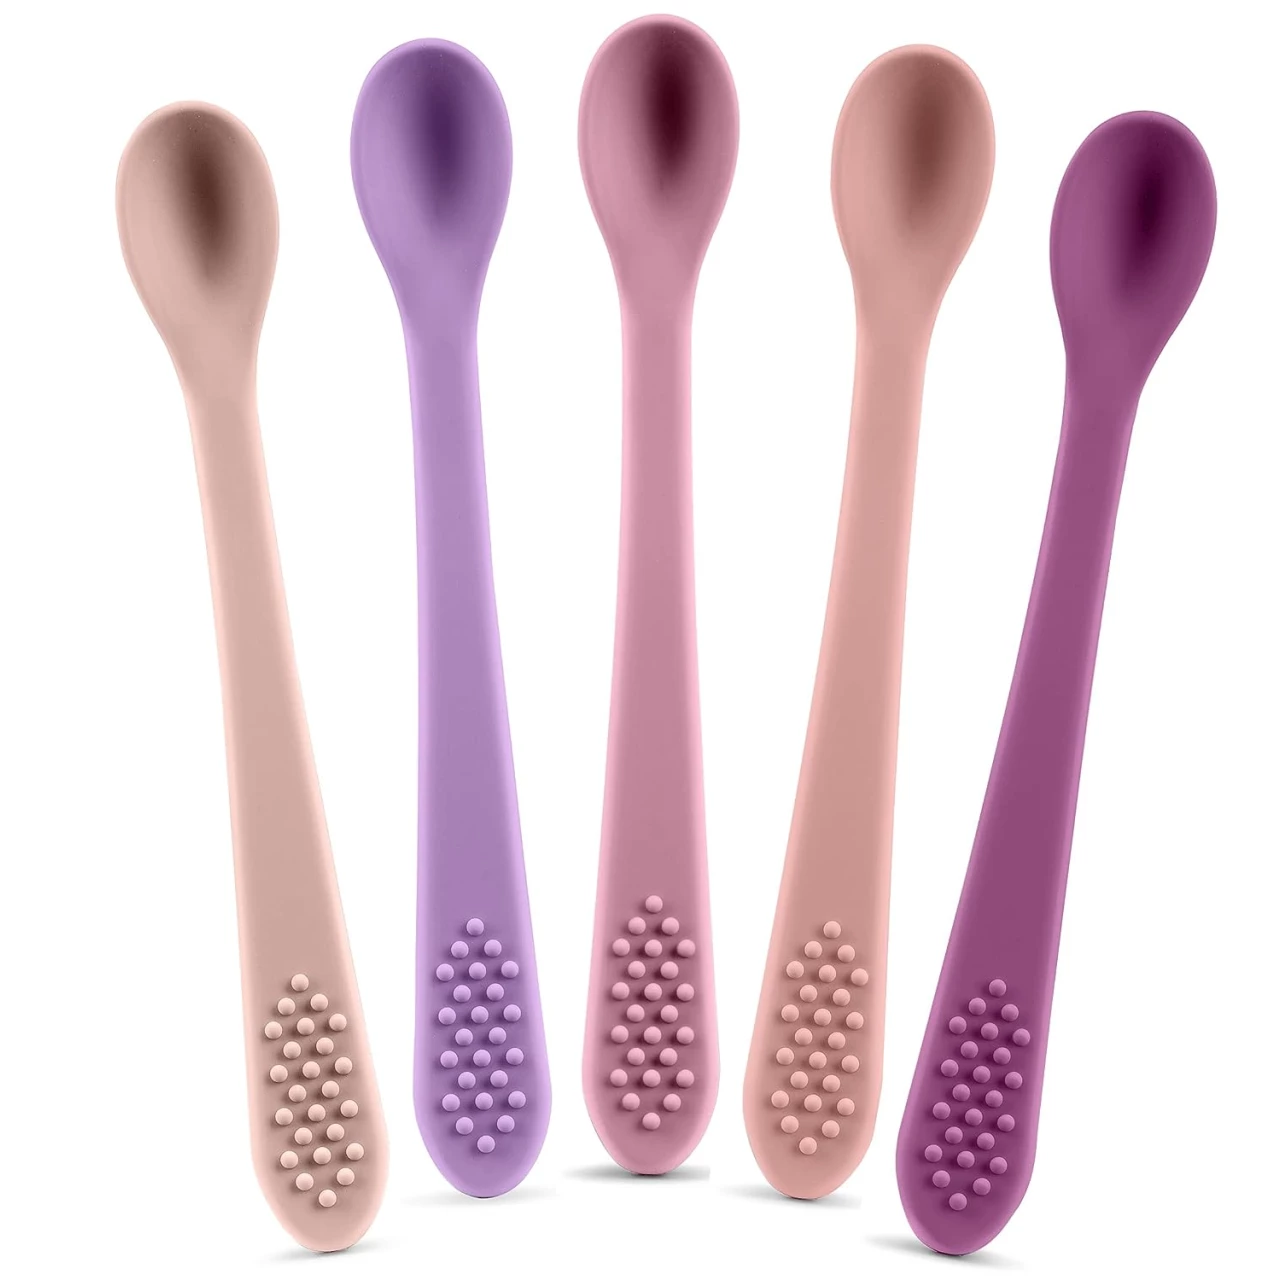 Baby Spoons - Infant Spoons First Stage - Silicone Baby Spoon For Self Feeding - First Stage Baby Feeding Spoon Set Gum Friendly - BPA Free